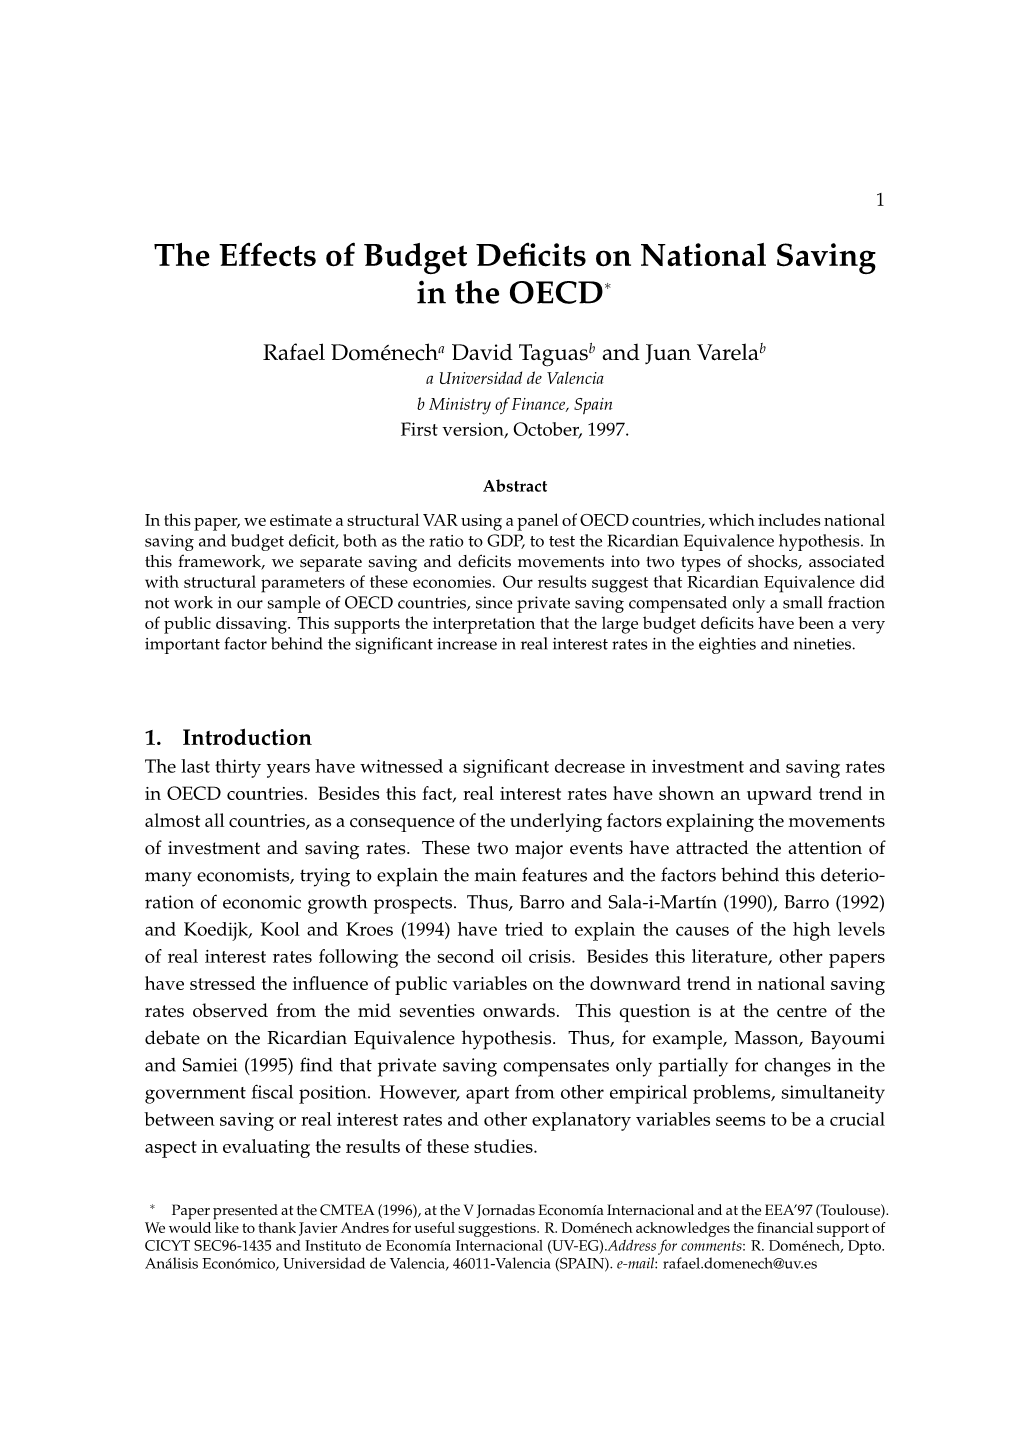 The Effects of Budget Deficits on National Saving in the OECD∗